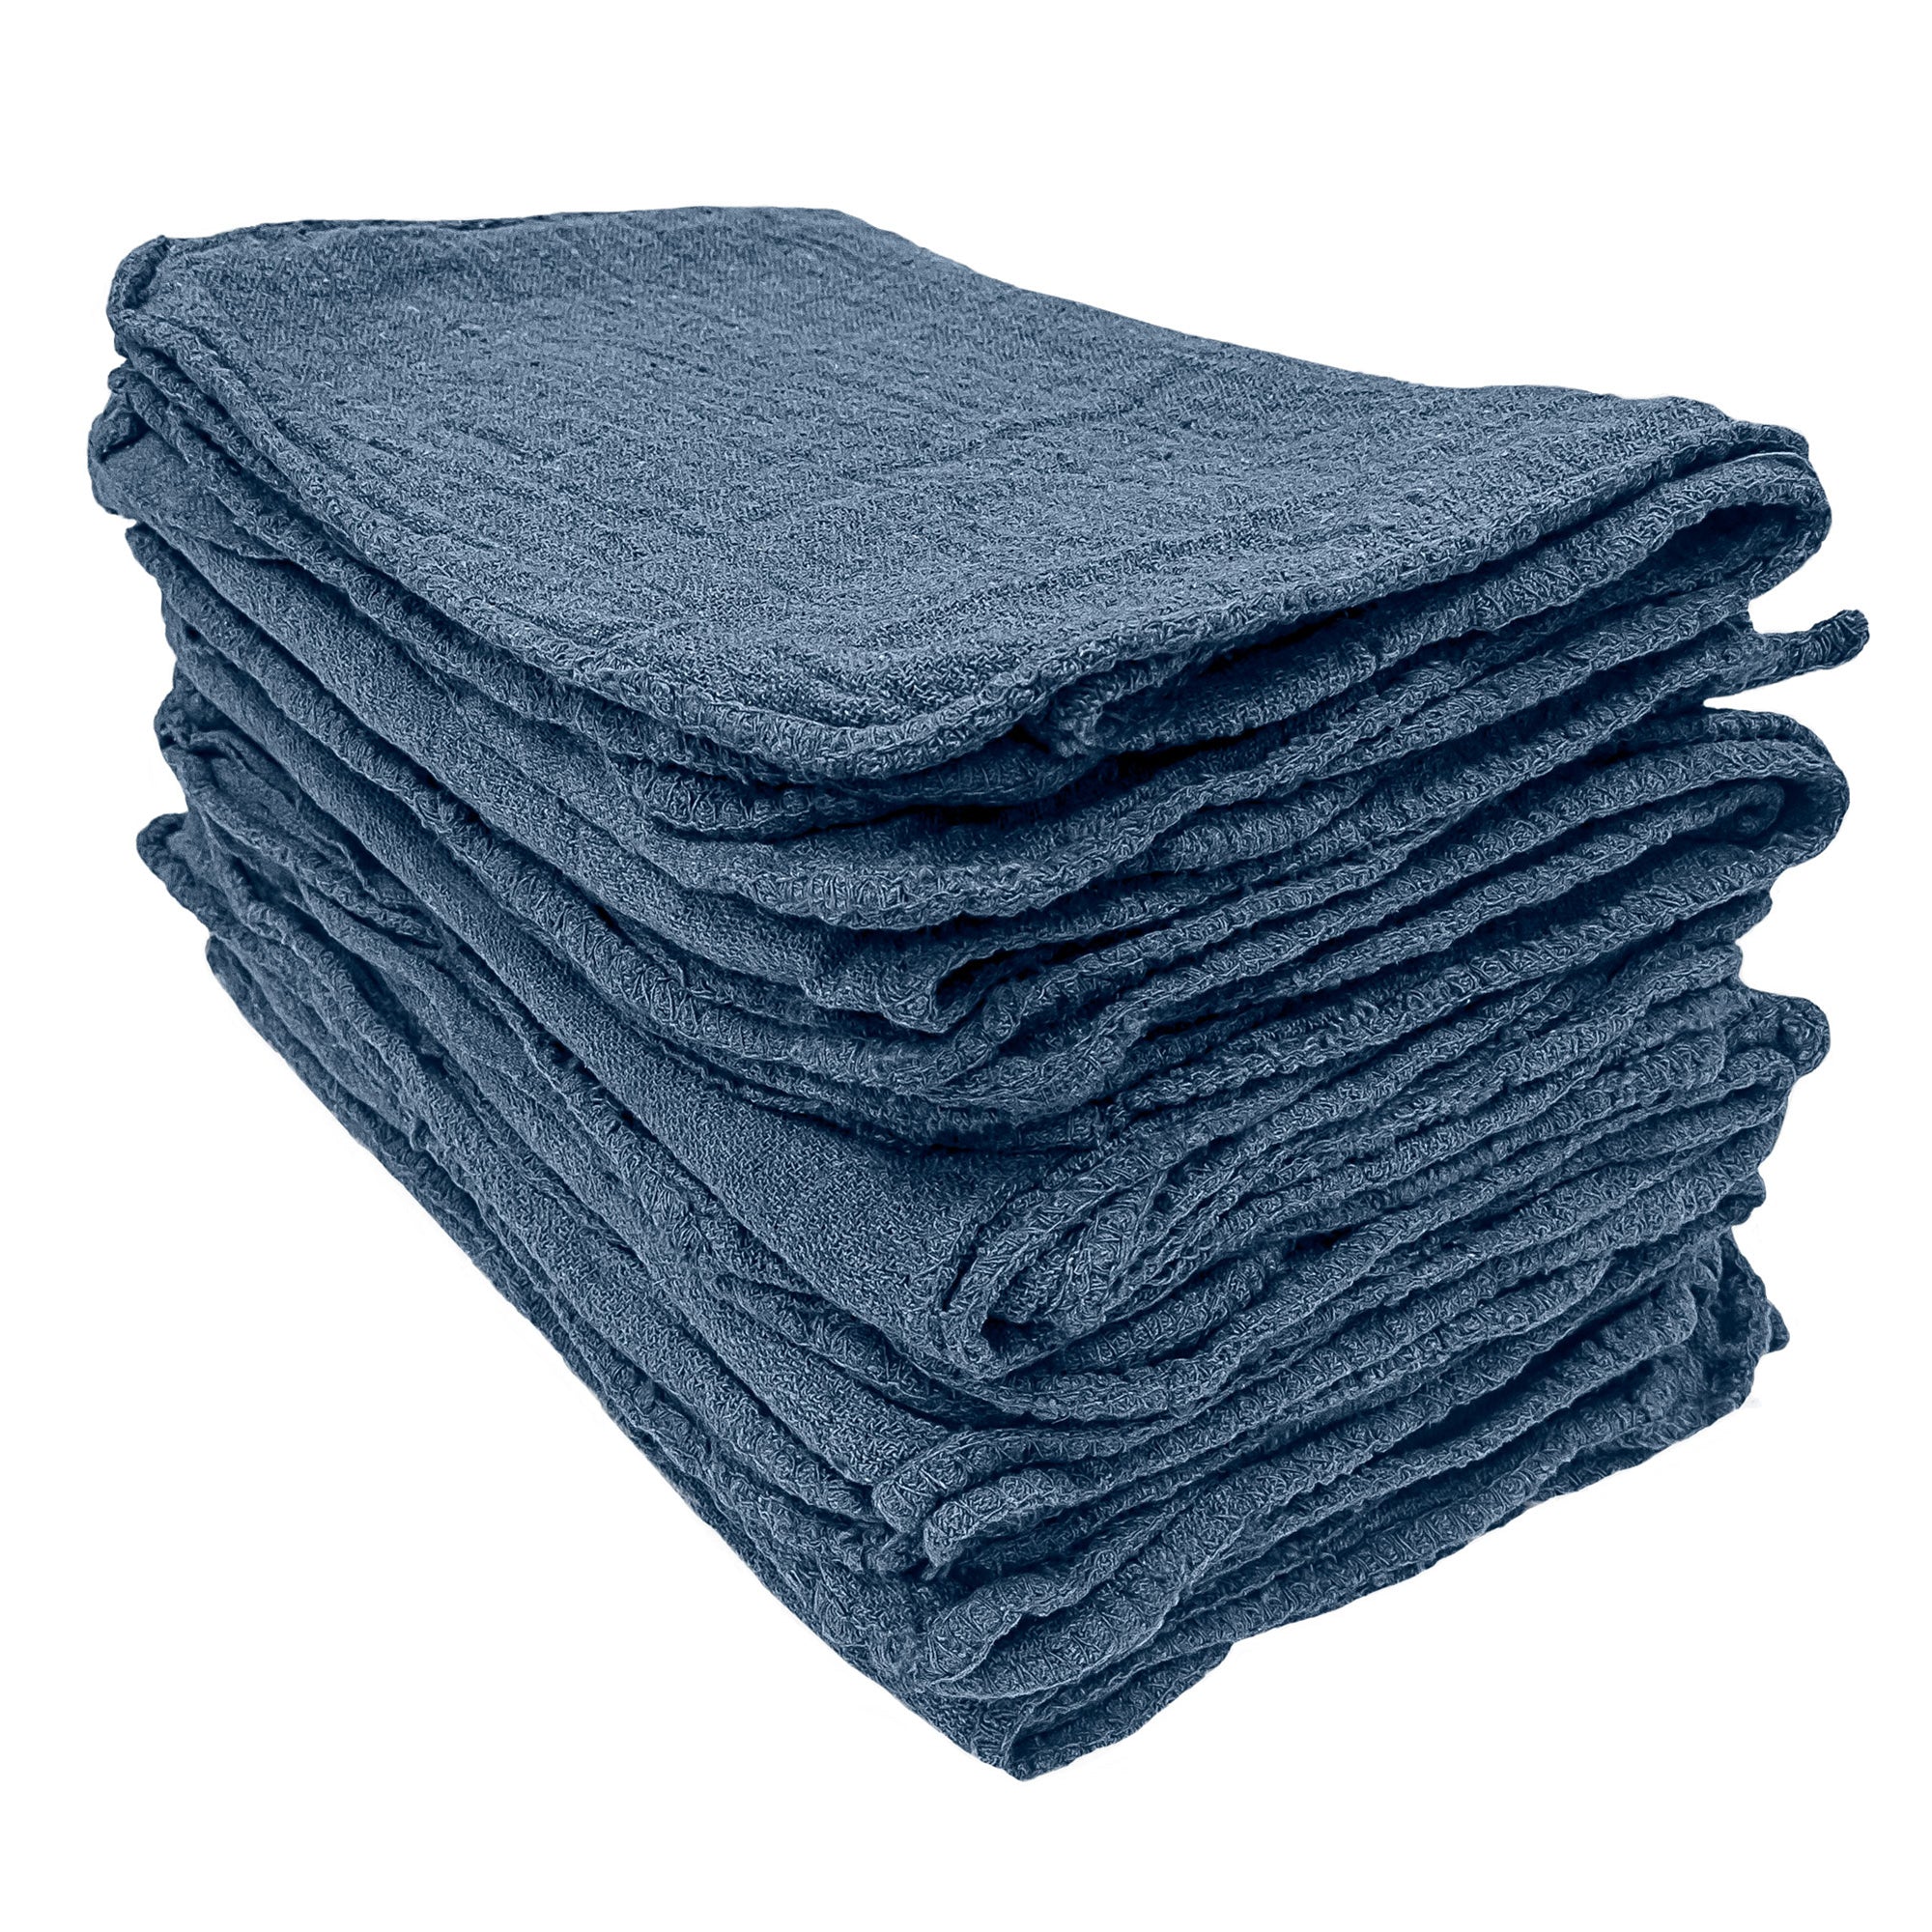 Detailer's Choice 3-685-5 Terry Towel - 12-Pack